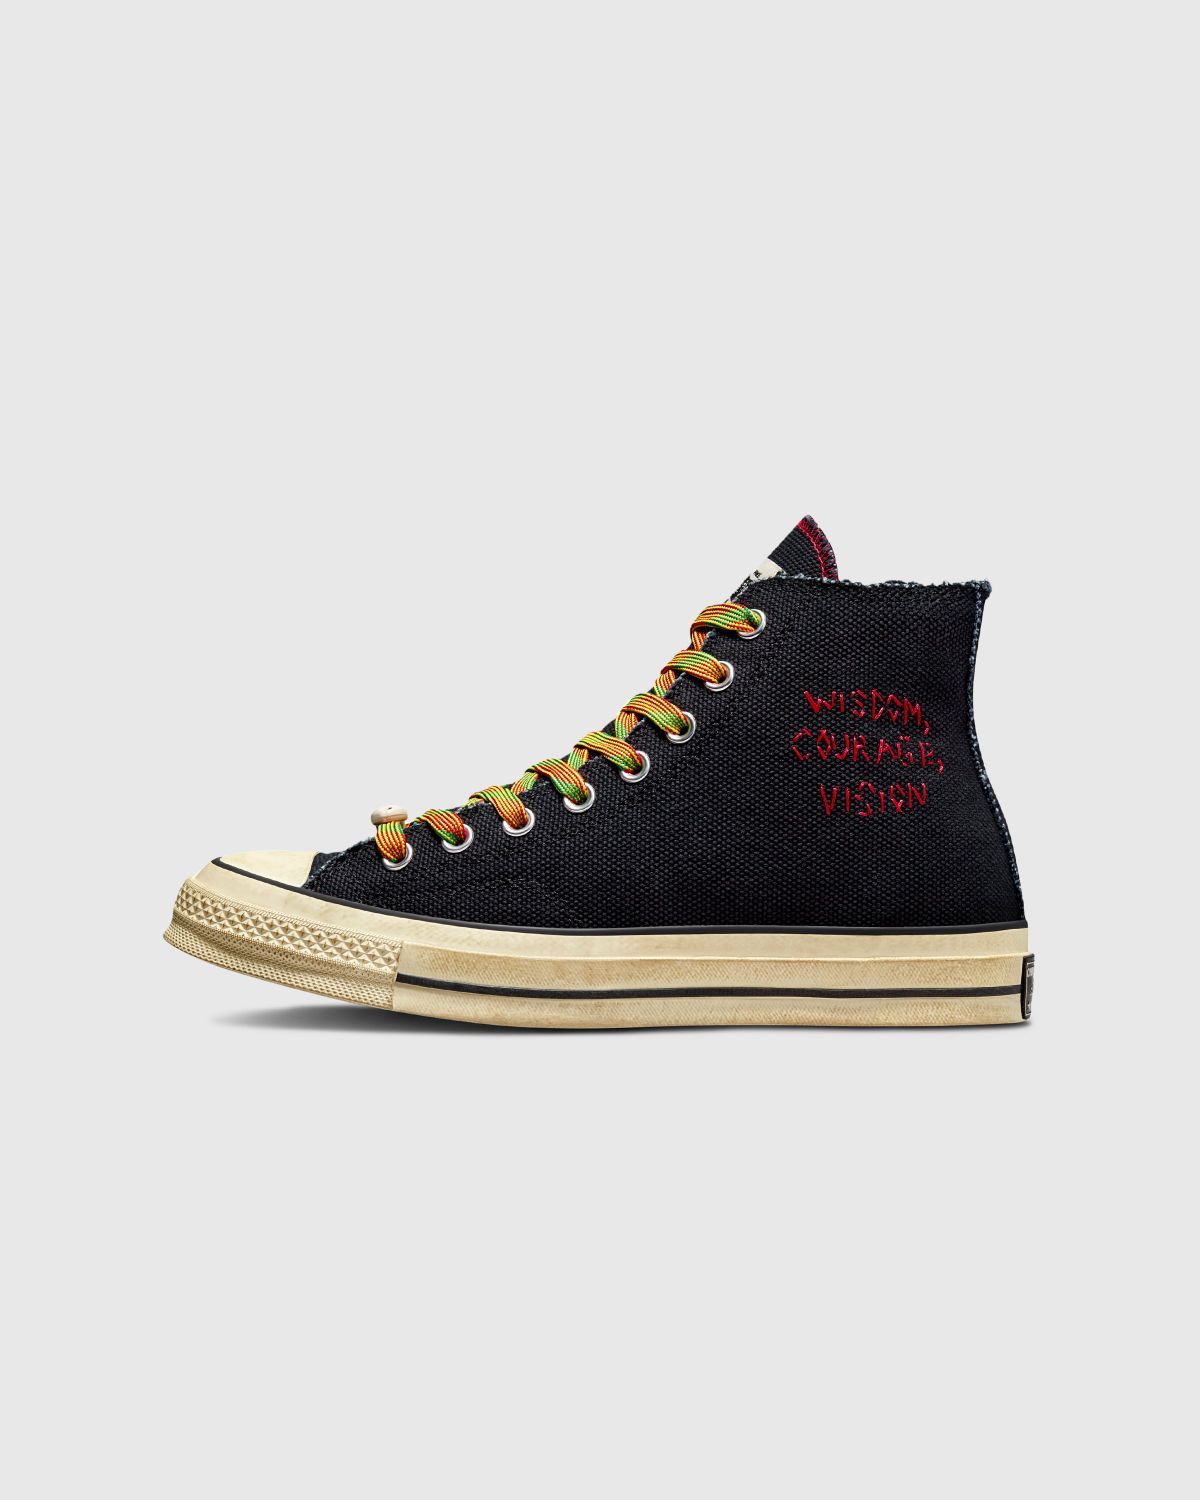 Converse x Barriers – Chuck 70 Hi Black/Fiery Red - High Top Sneakers - Black - Image 2